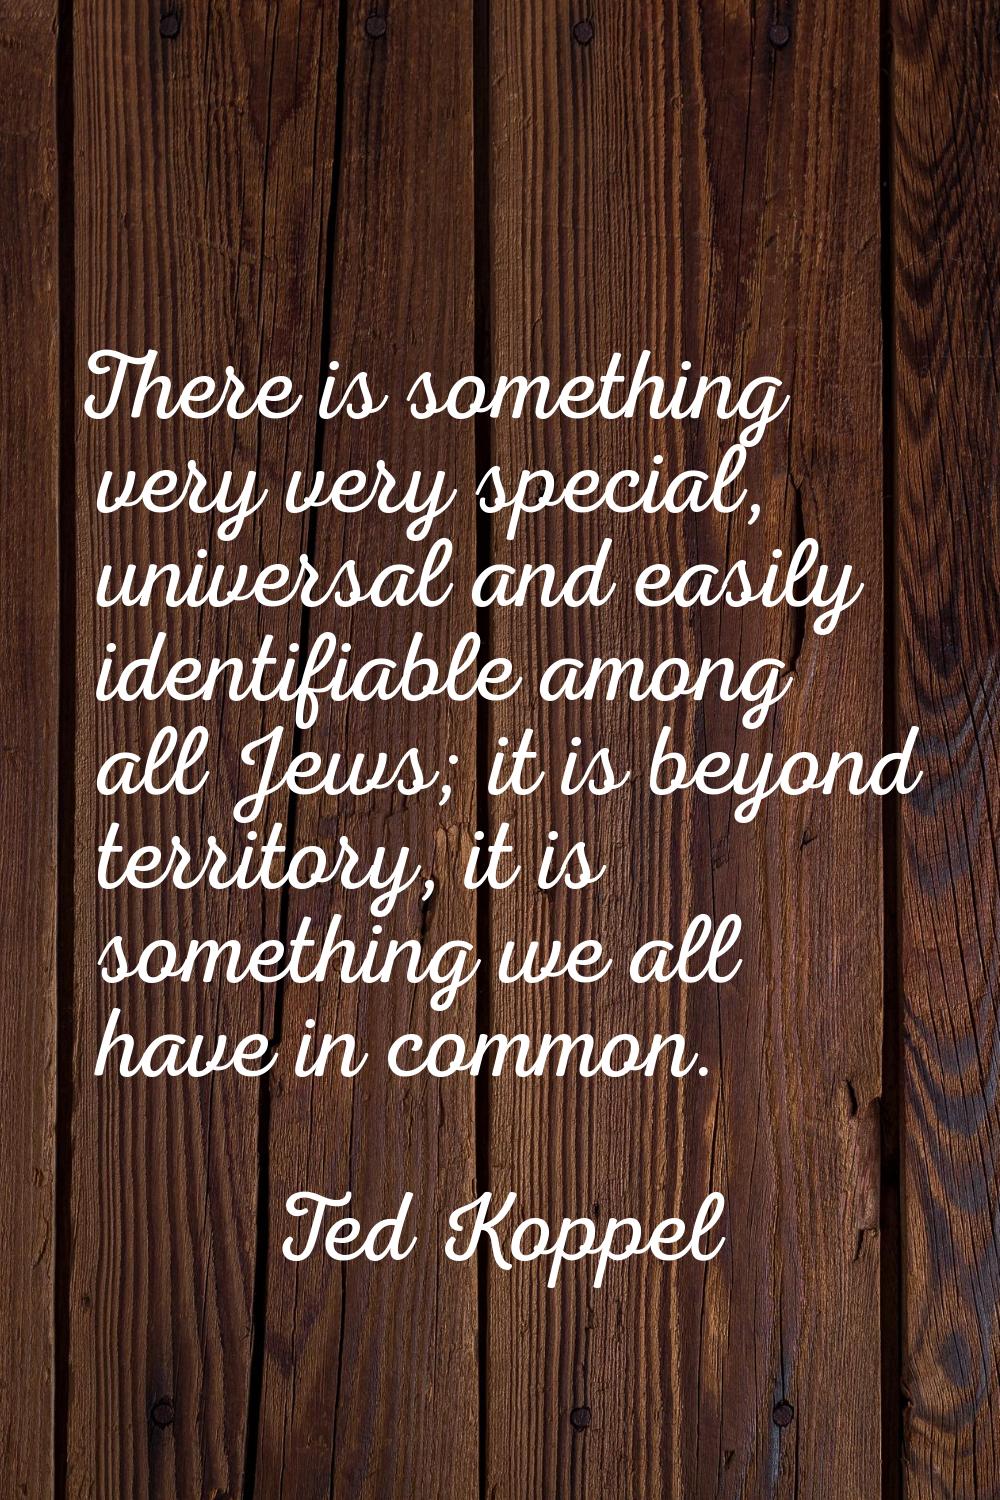 There is something very very special, universal and easily identifiable among all Jews; it is beyon